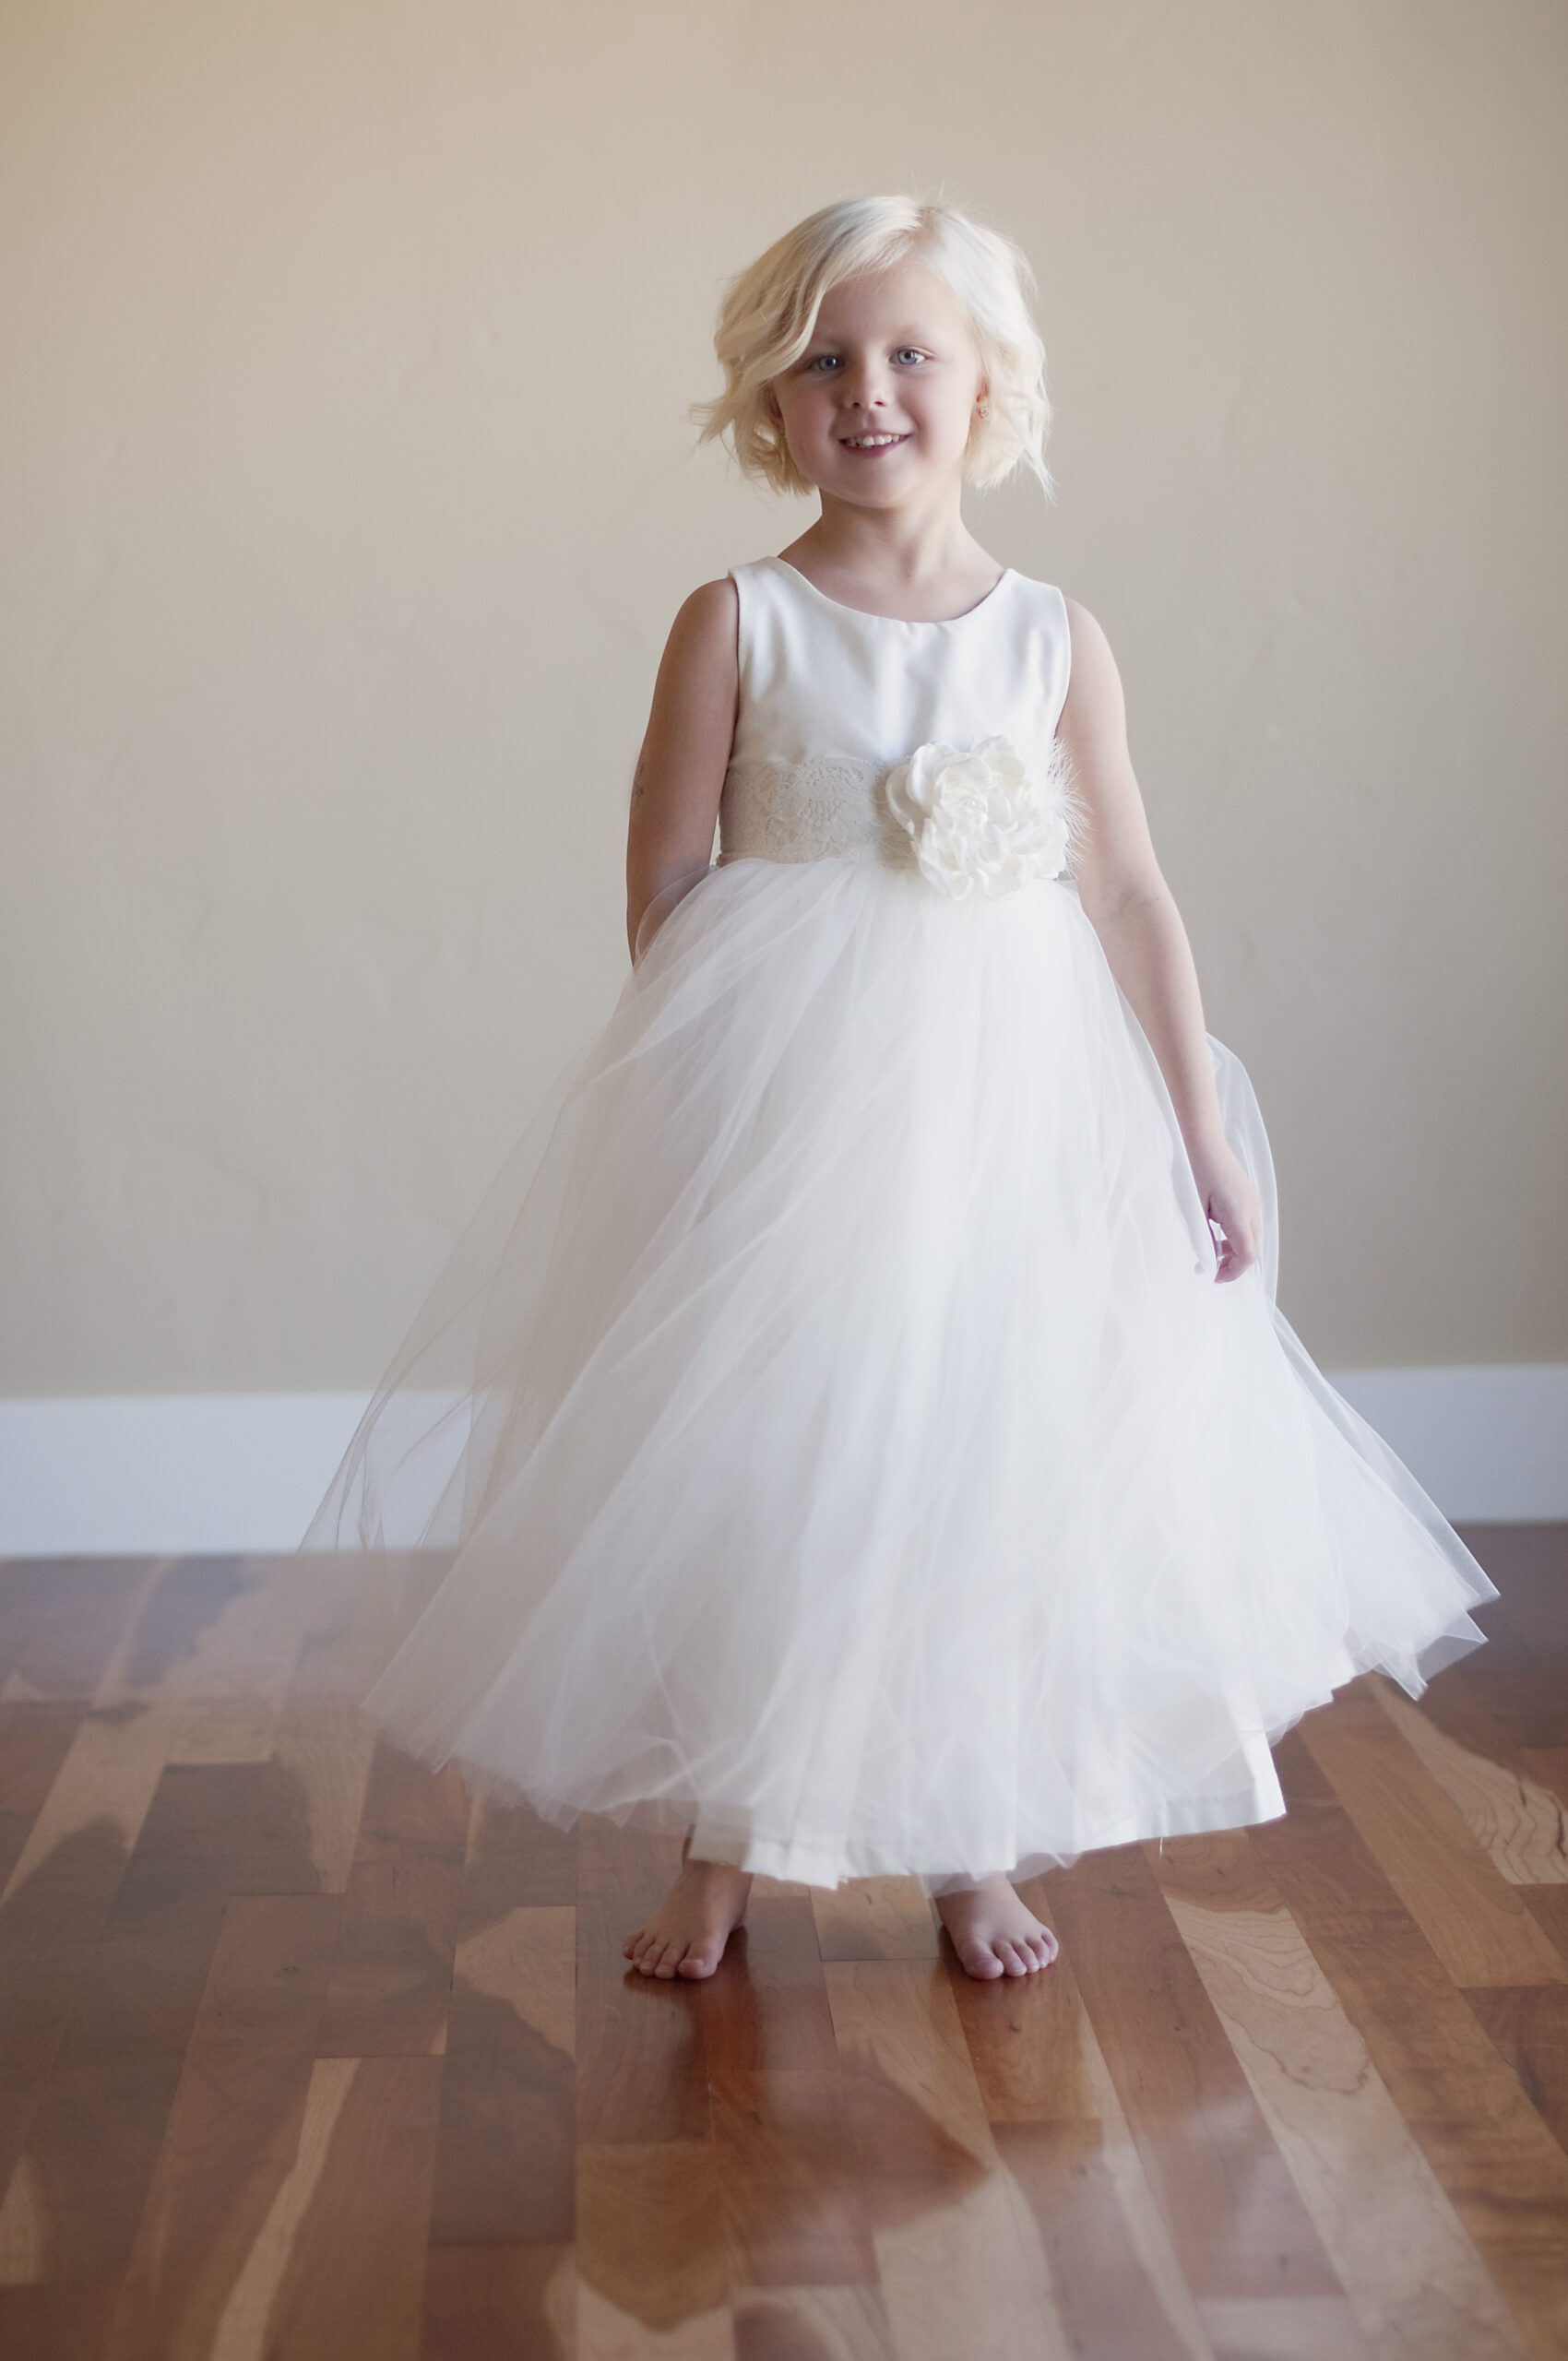 A photo of a 4 year old flower girl wearing a nivory dress with a ailk bodice and a full tulle skirt with an over sized flower on a lace sash